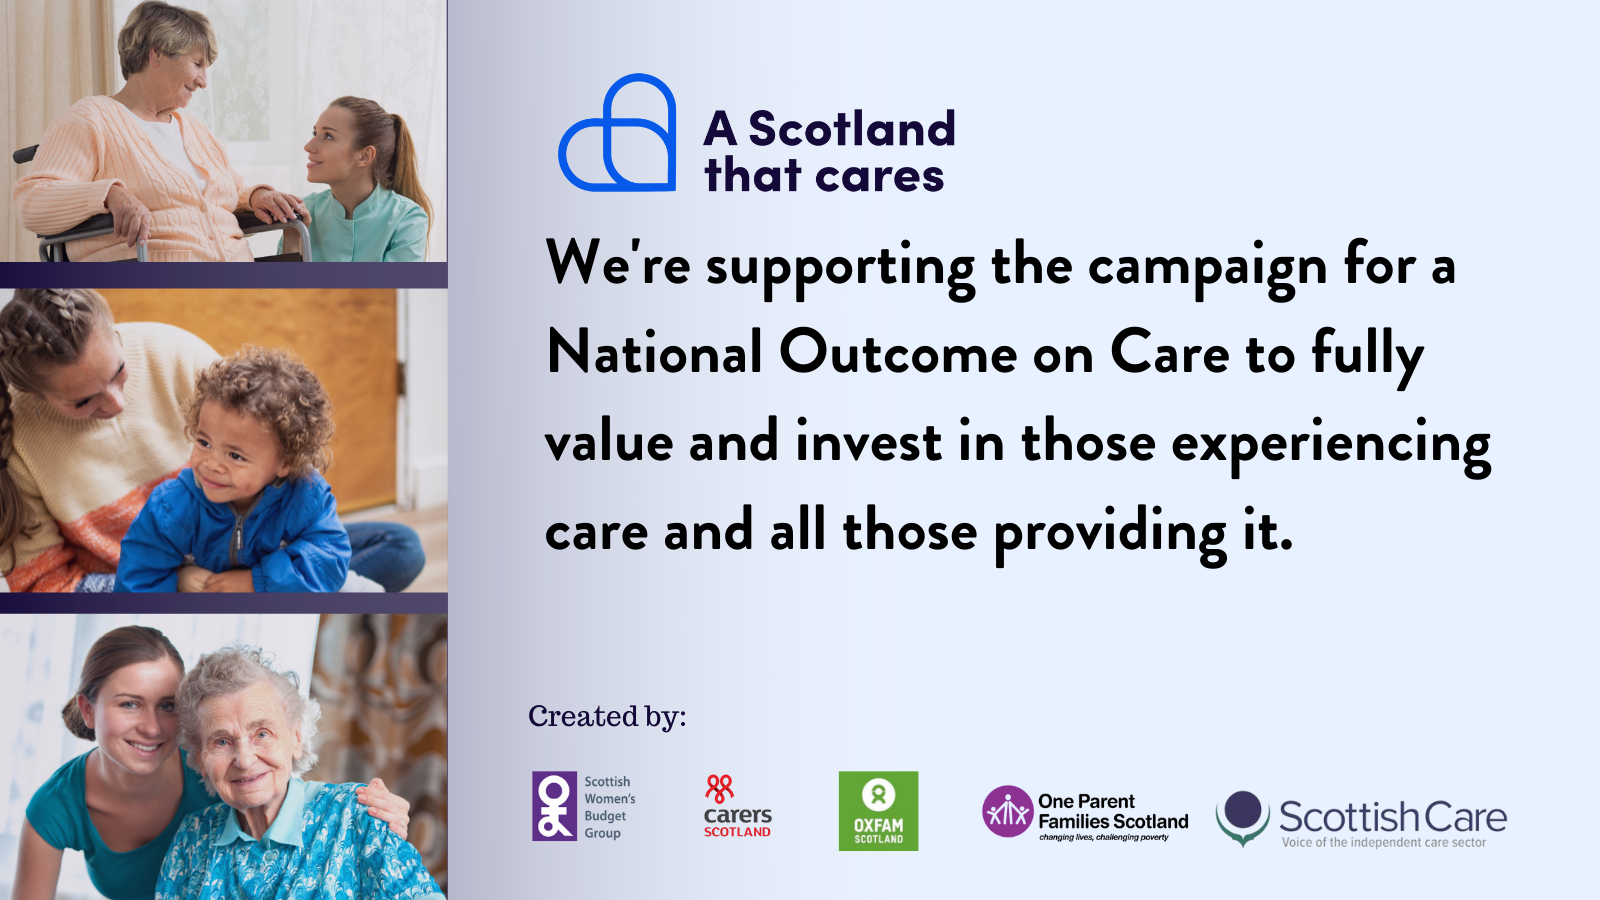 Scotland’s paid and unpaid carers have been undervalued and overlooked for far too long